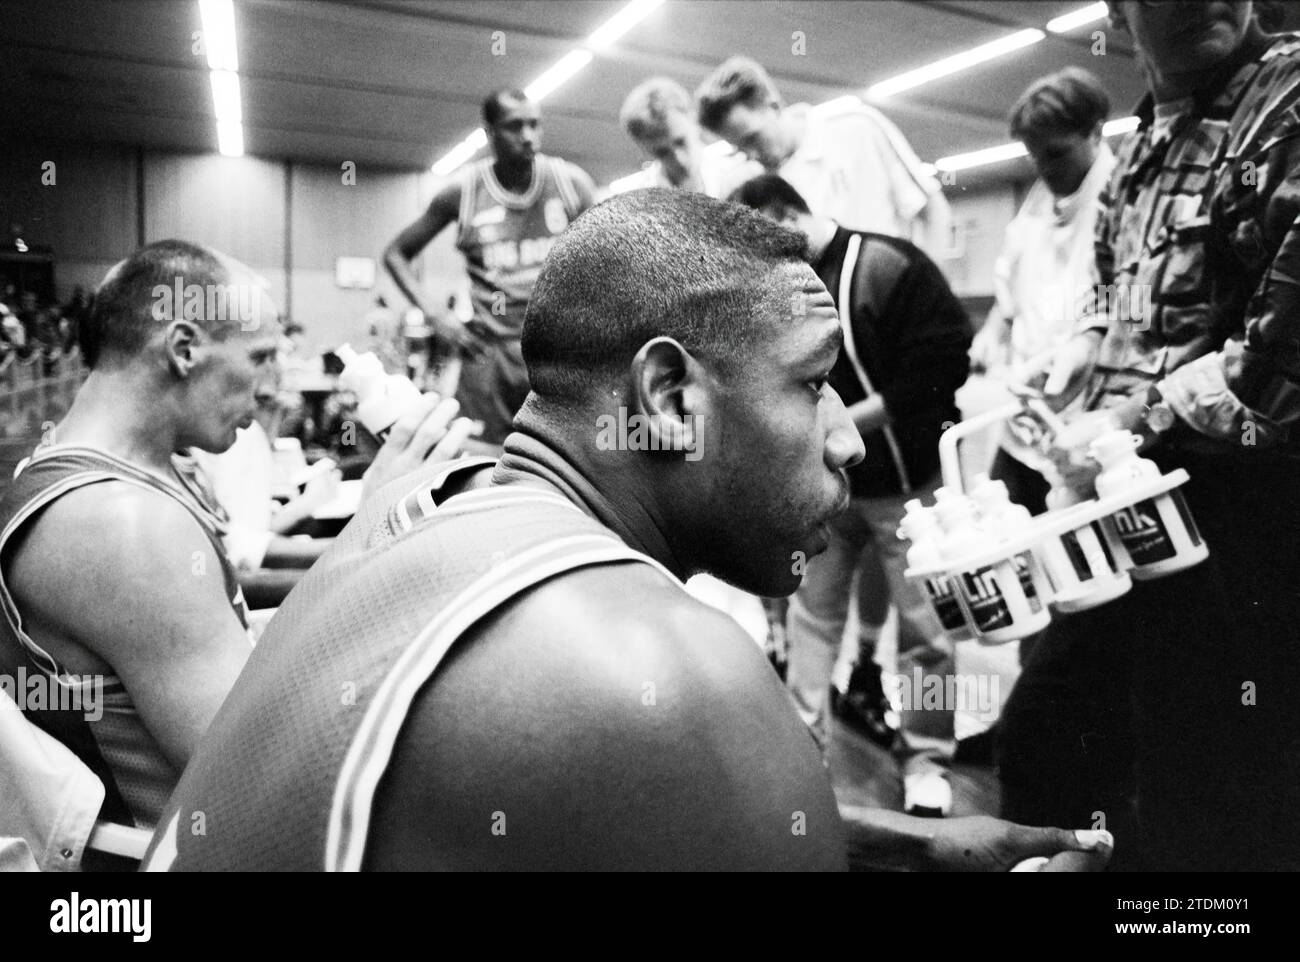 Akrides - Goba, basketball, 06-01-1995, Whizgle News from the Past, Tailored for the Future. Explore historical narratives, Dutch The Netherlands agency image with a modern perspective, bridging the gap between yesterday's events and tomorrow's insights. A timeless journey shaping the stories that shape our future Stock Photo